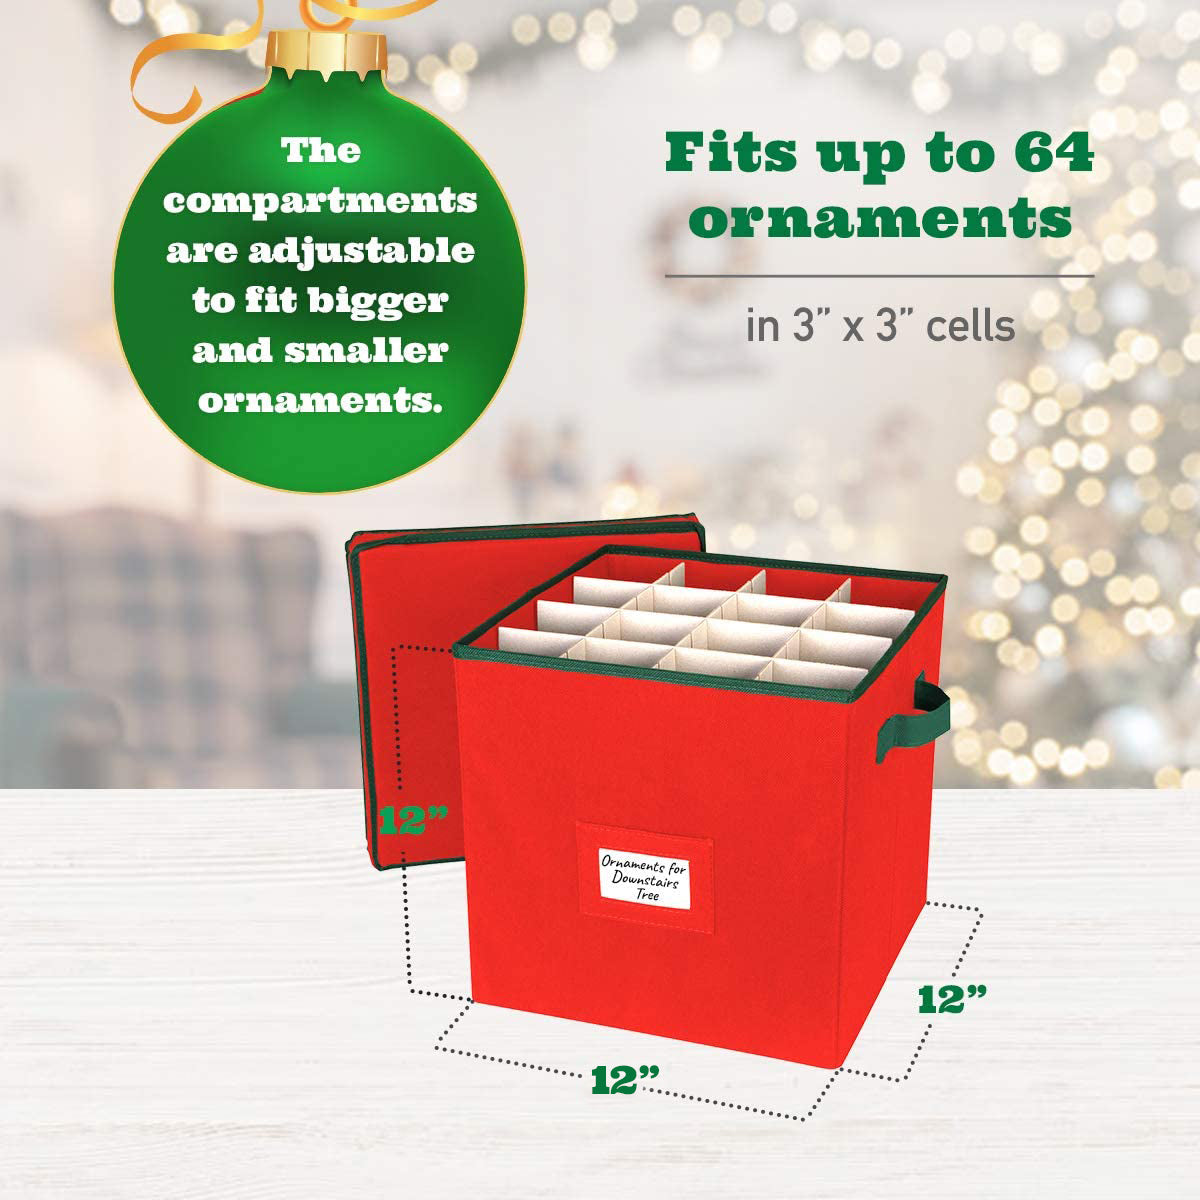 Christmas Ornament Storage Box with Lid - Christmas Decor Storage Containers that Store up to 64 Holiday Ornaments